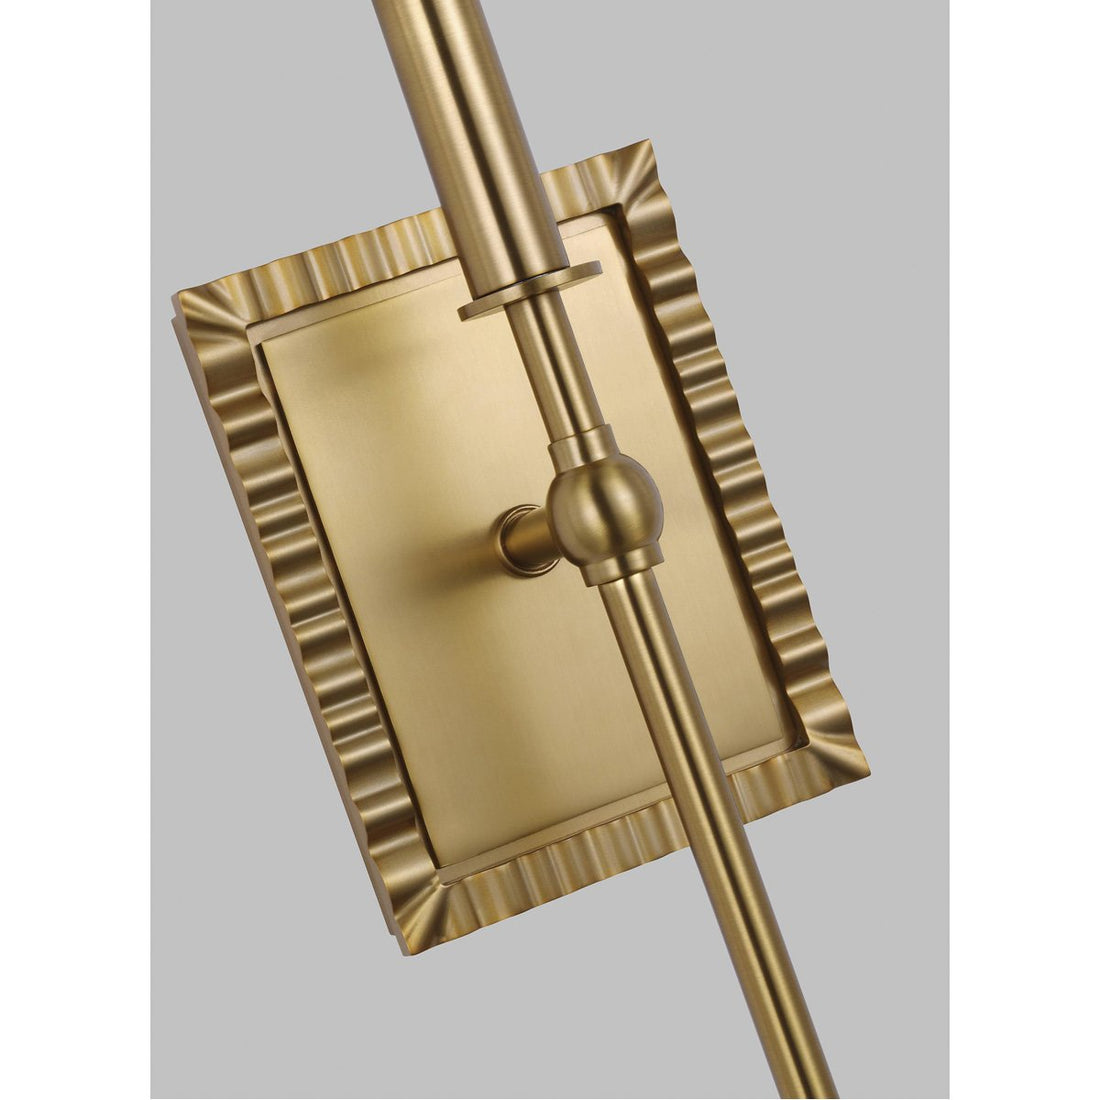 Feiss Baxley 1-Light Sconce